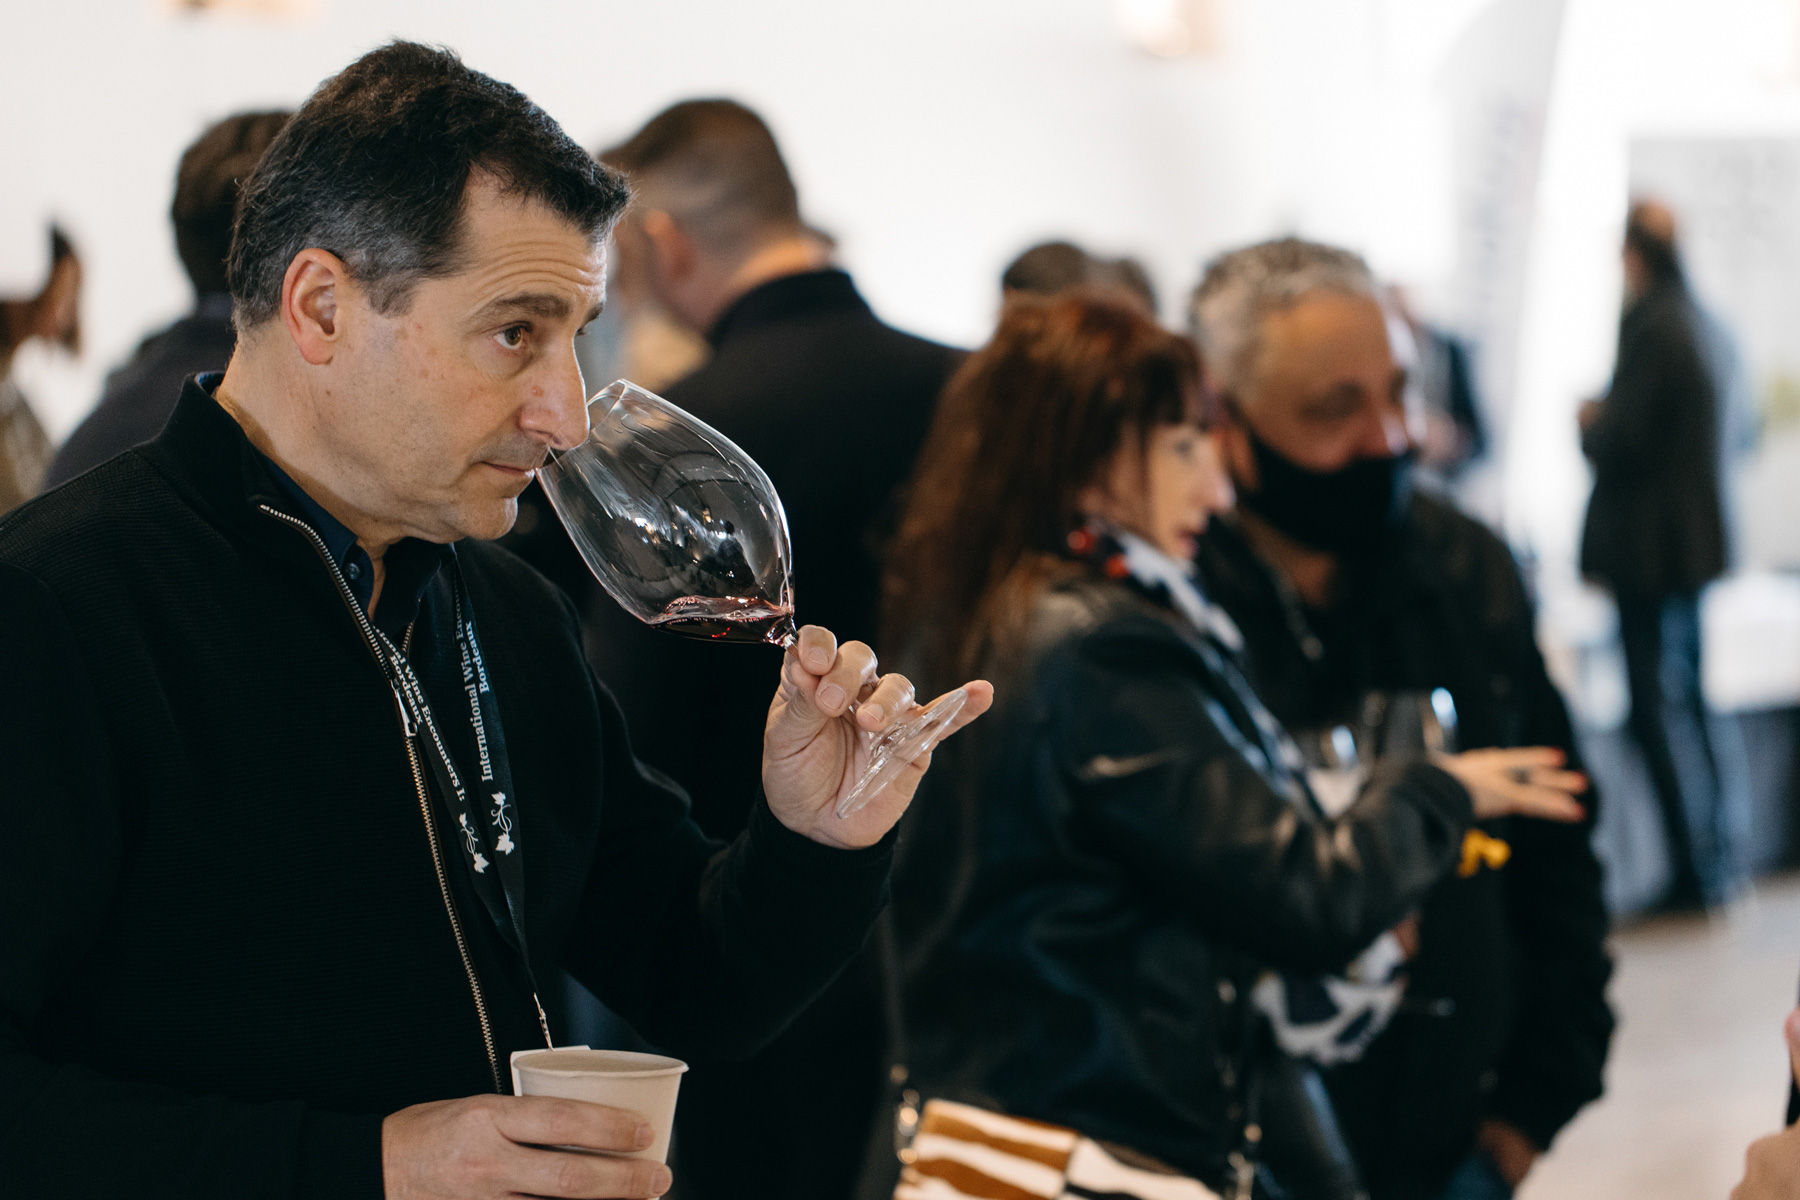 Josep Roca to lead a unique tasting to show the perfect synergy between wine and time